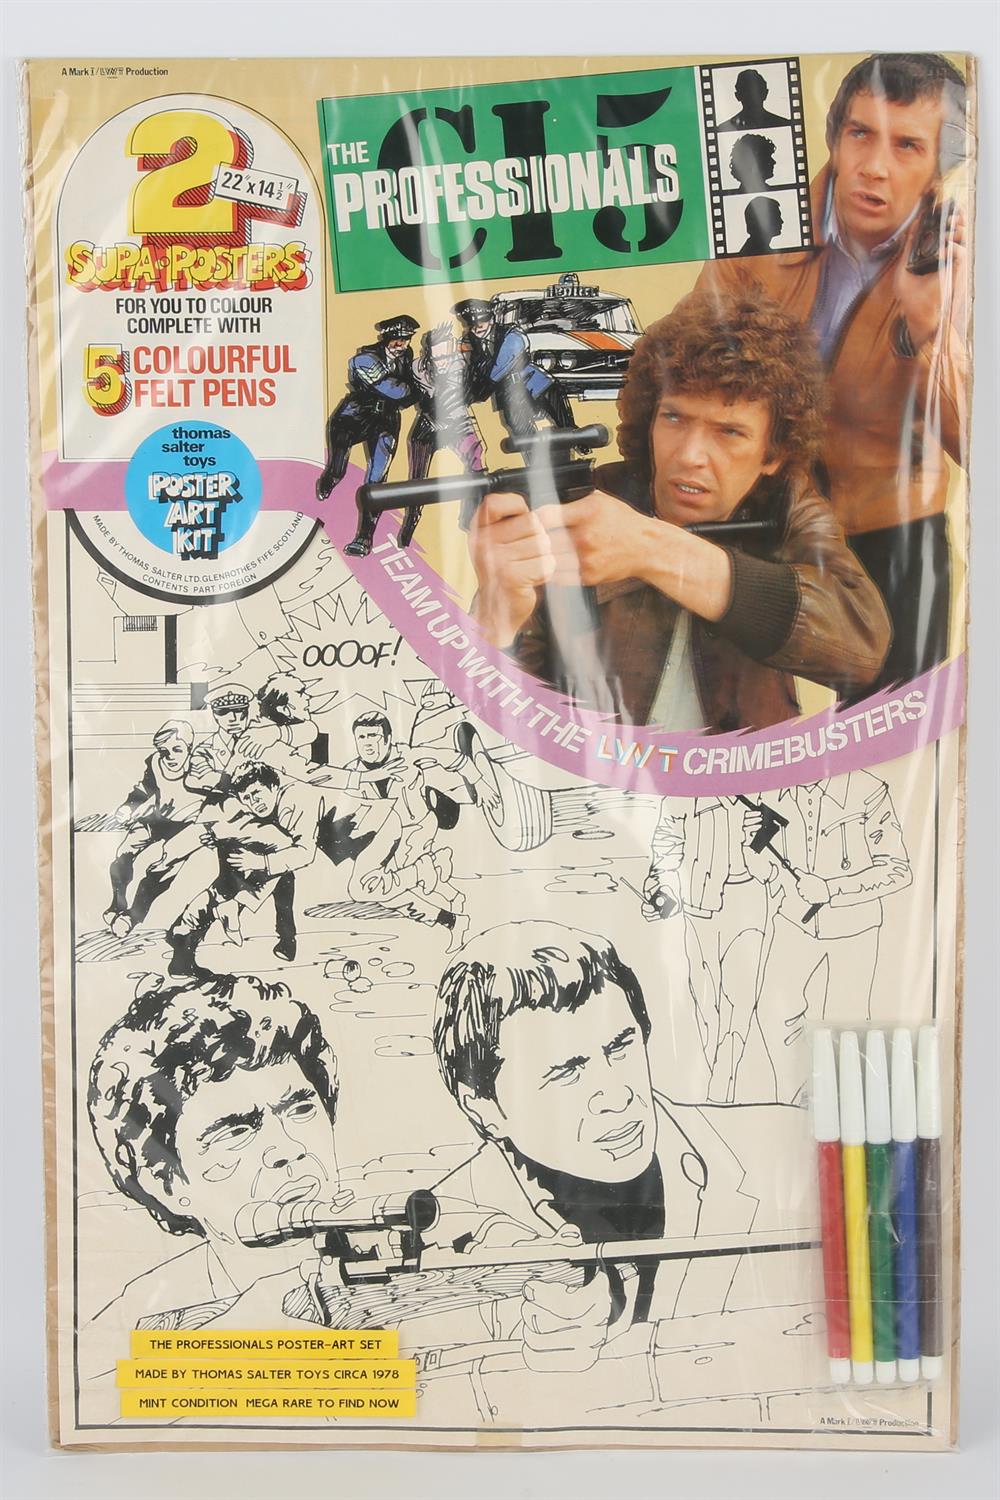 CI5 The Professionals - 2 Supa-posters poster art kit featuring Bodie and Doyle. Made by Thomas